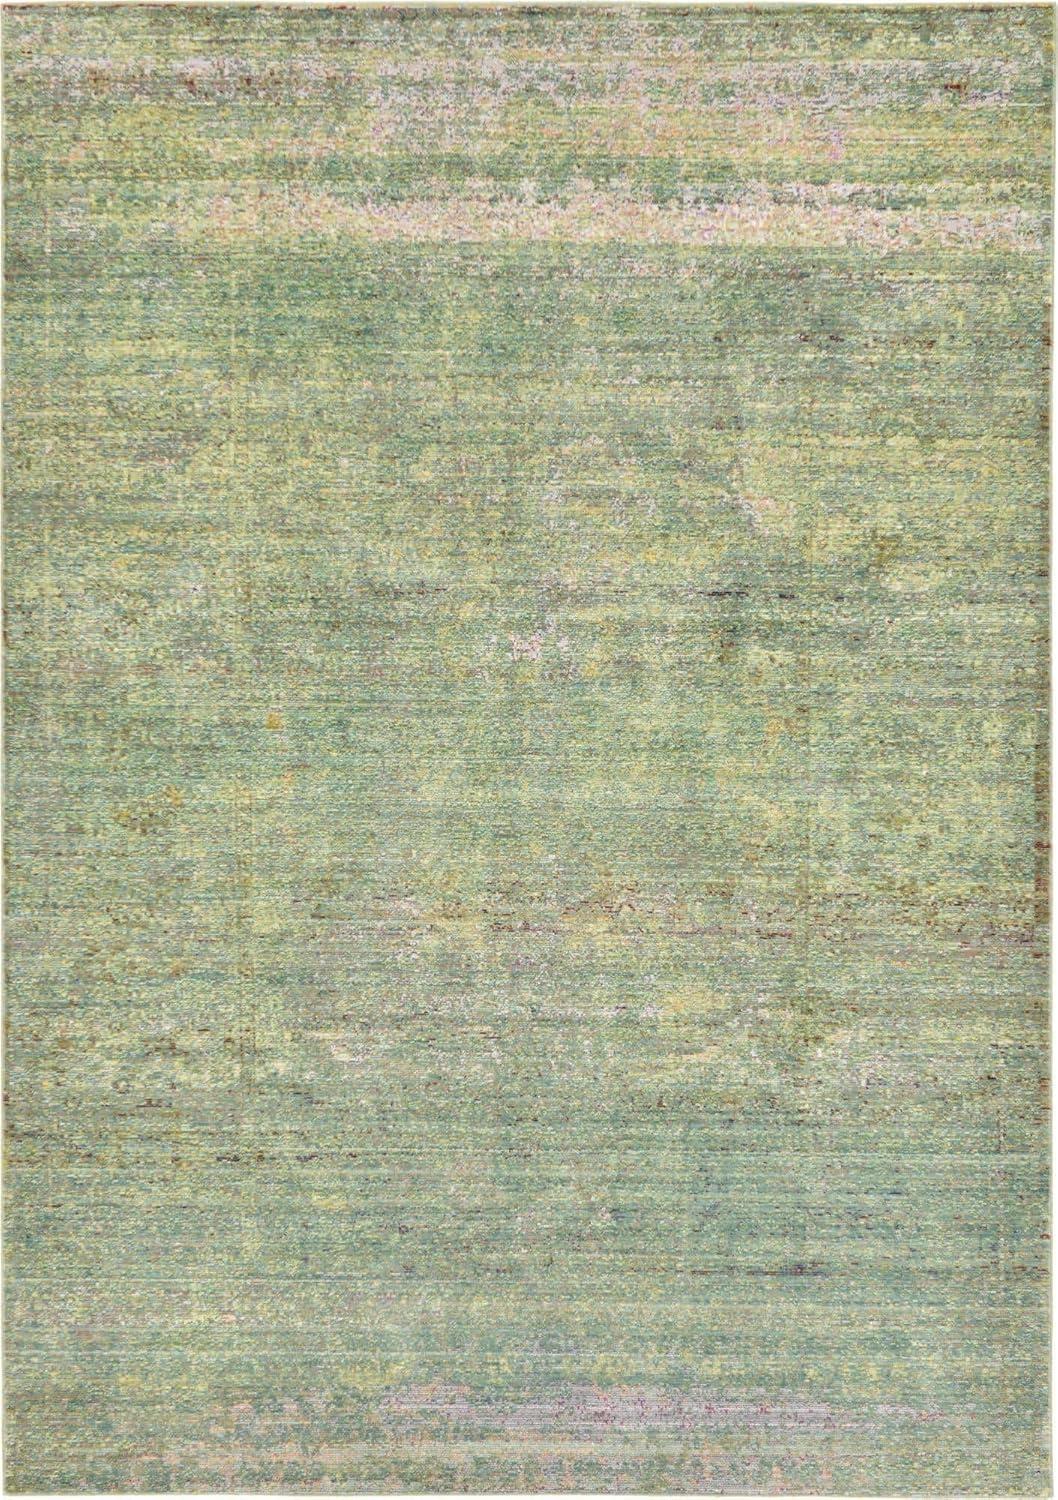 Alexis Abstract Speckled 6' x 9' Green Polyester Area Rug